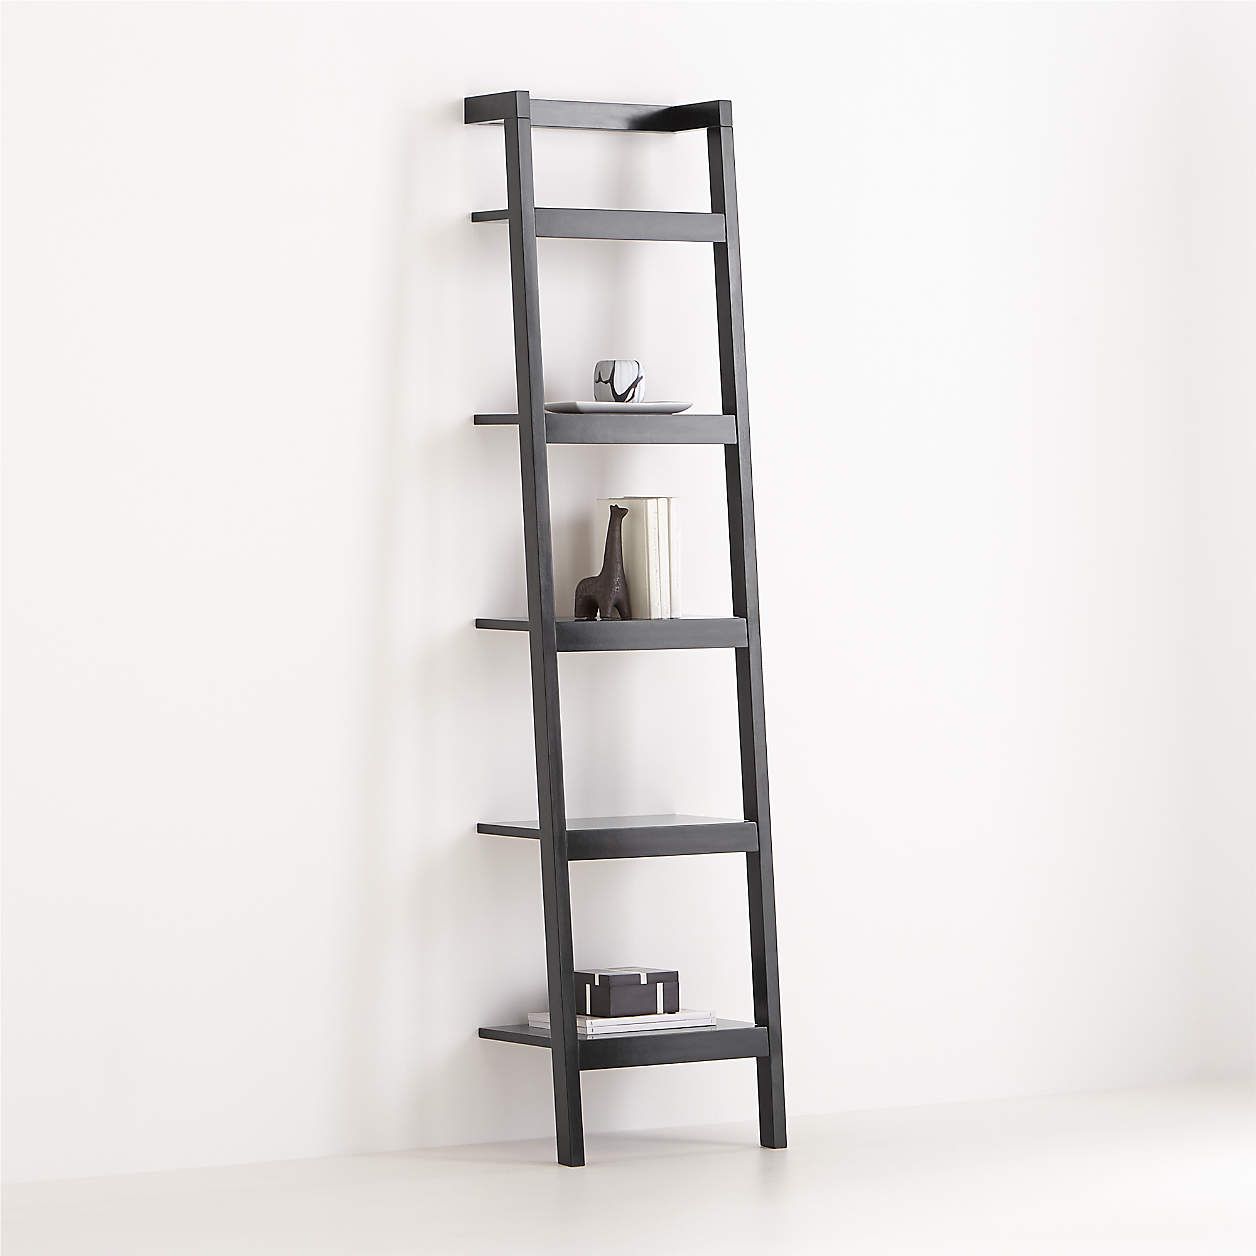 Sawyer White Leaning 18" Bookcase + Reviews | Crate and Barrel | Crate & Barrel